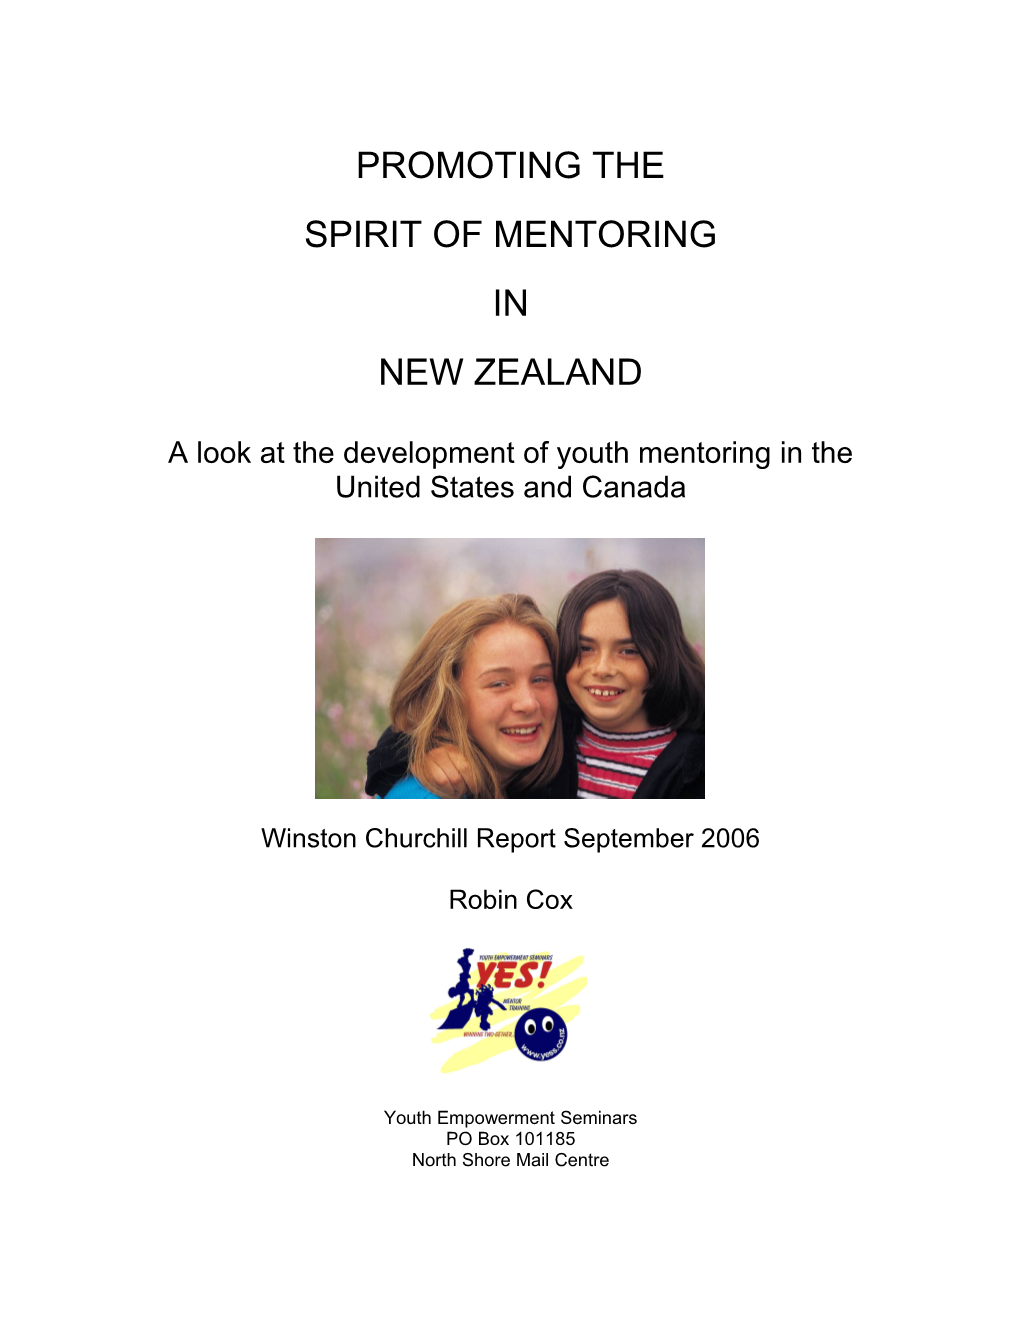 A Look at the Development of Youth Mentoring in the United States and Canada